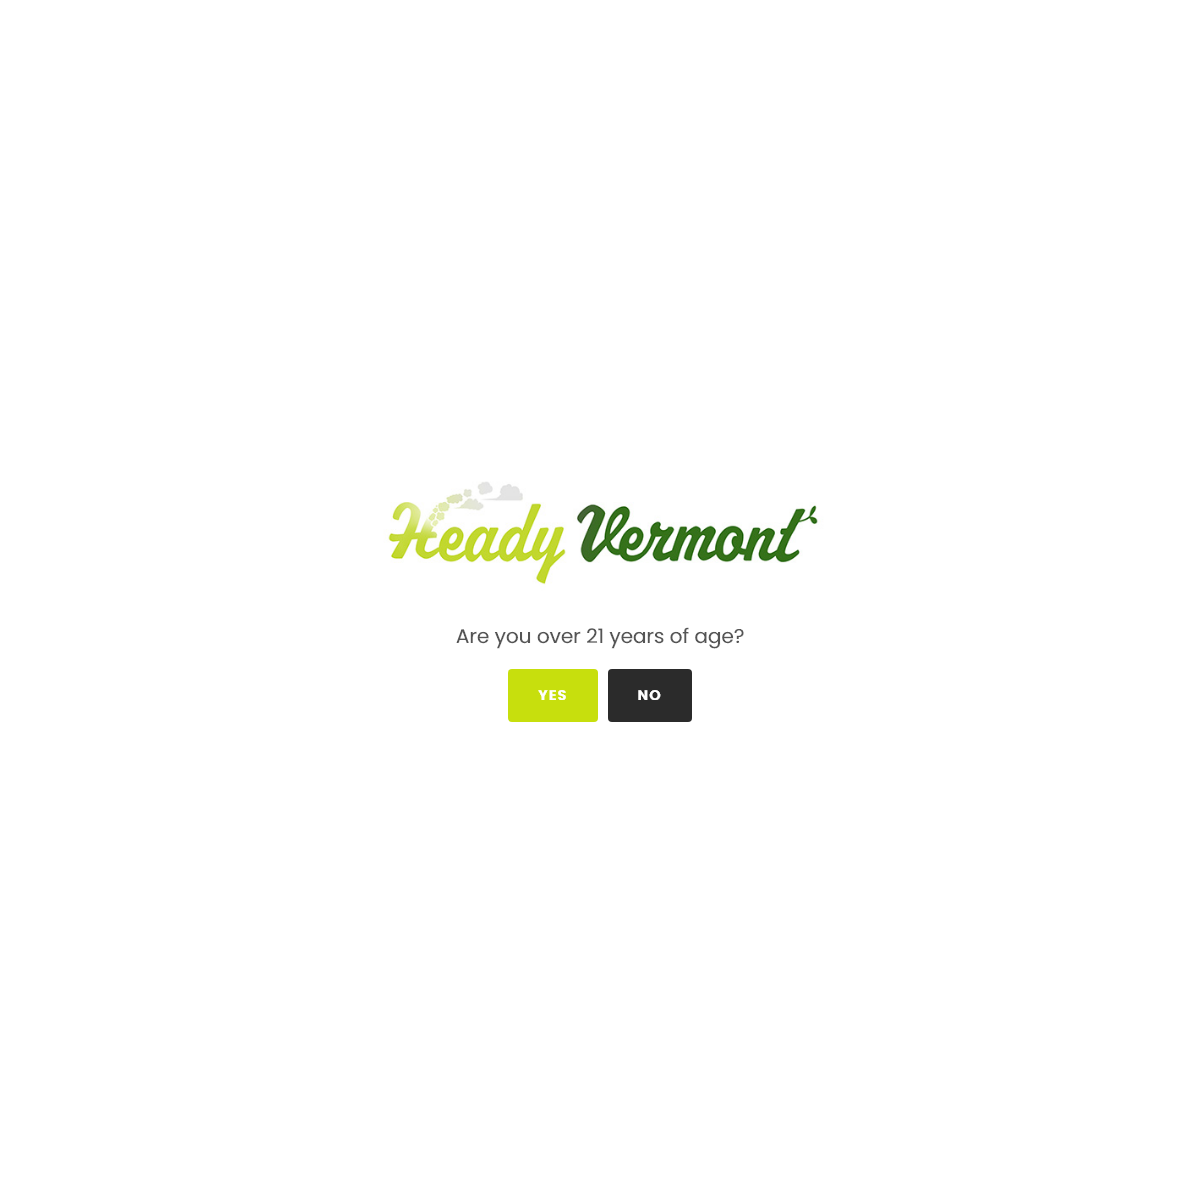 A complete backup of headyvermont.com